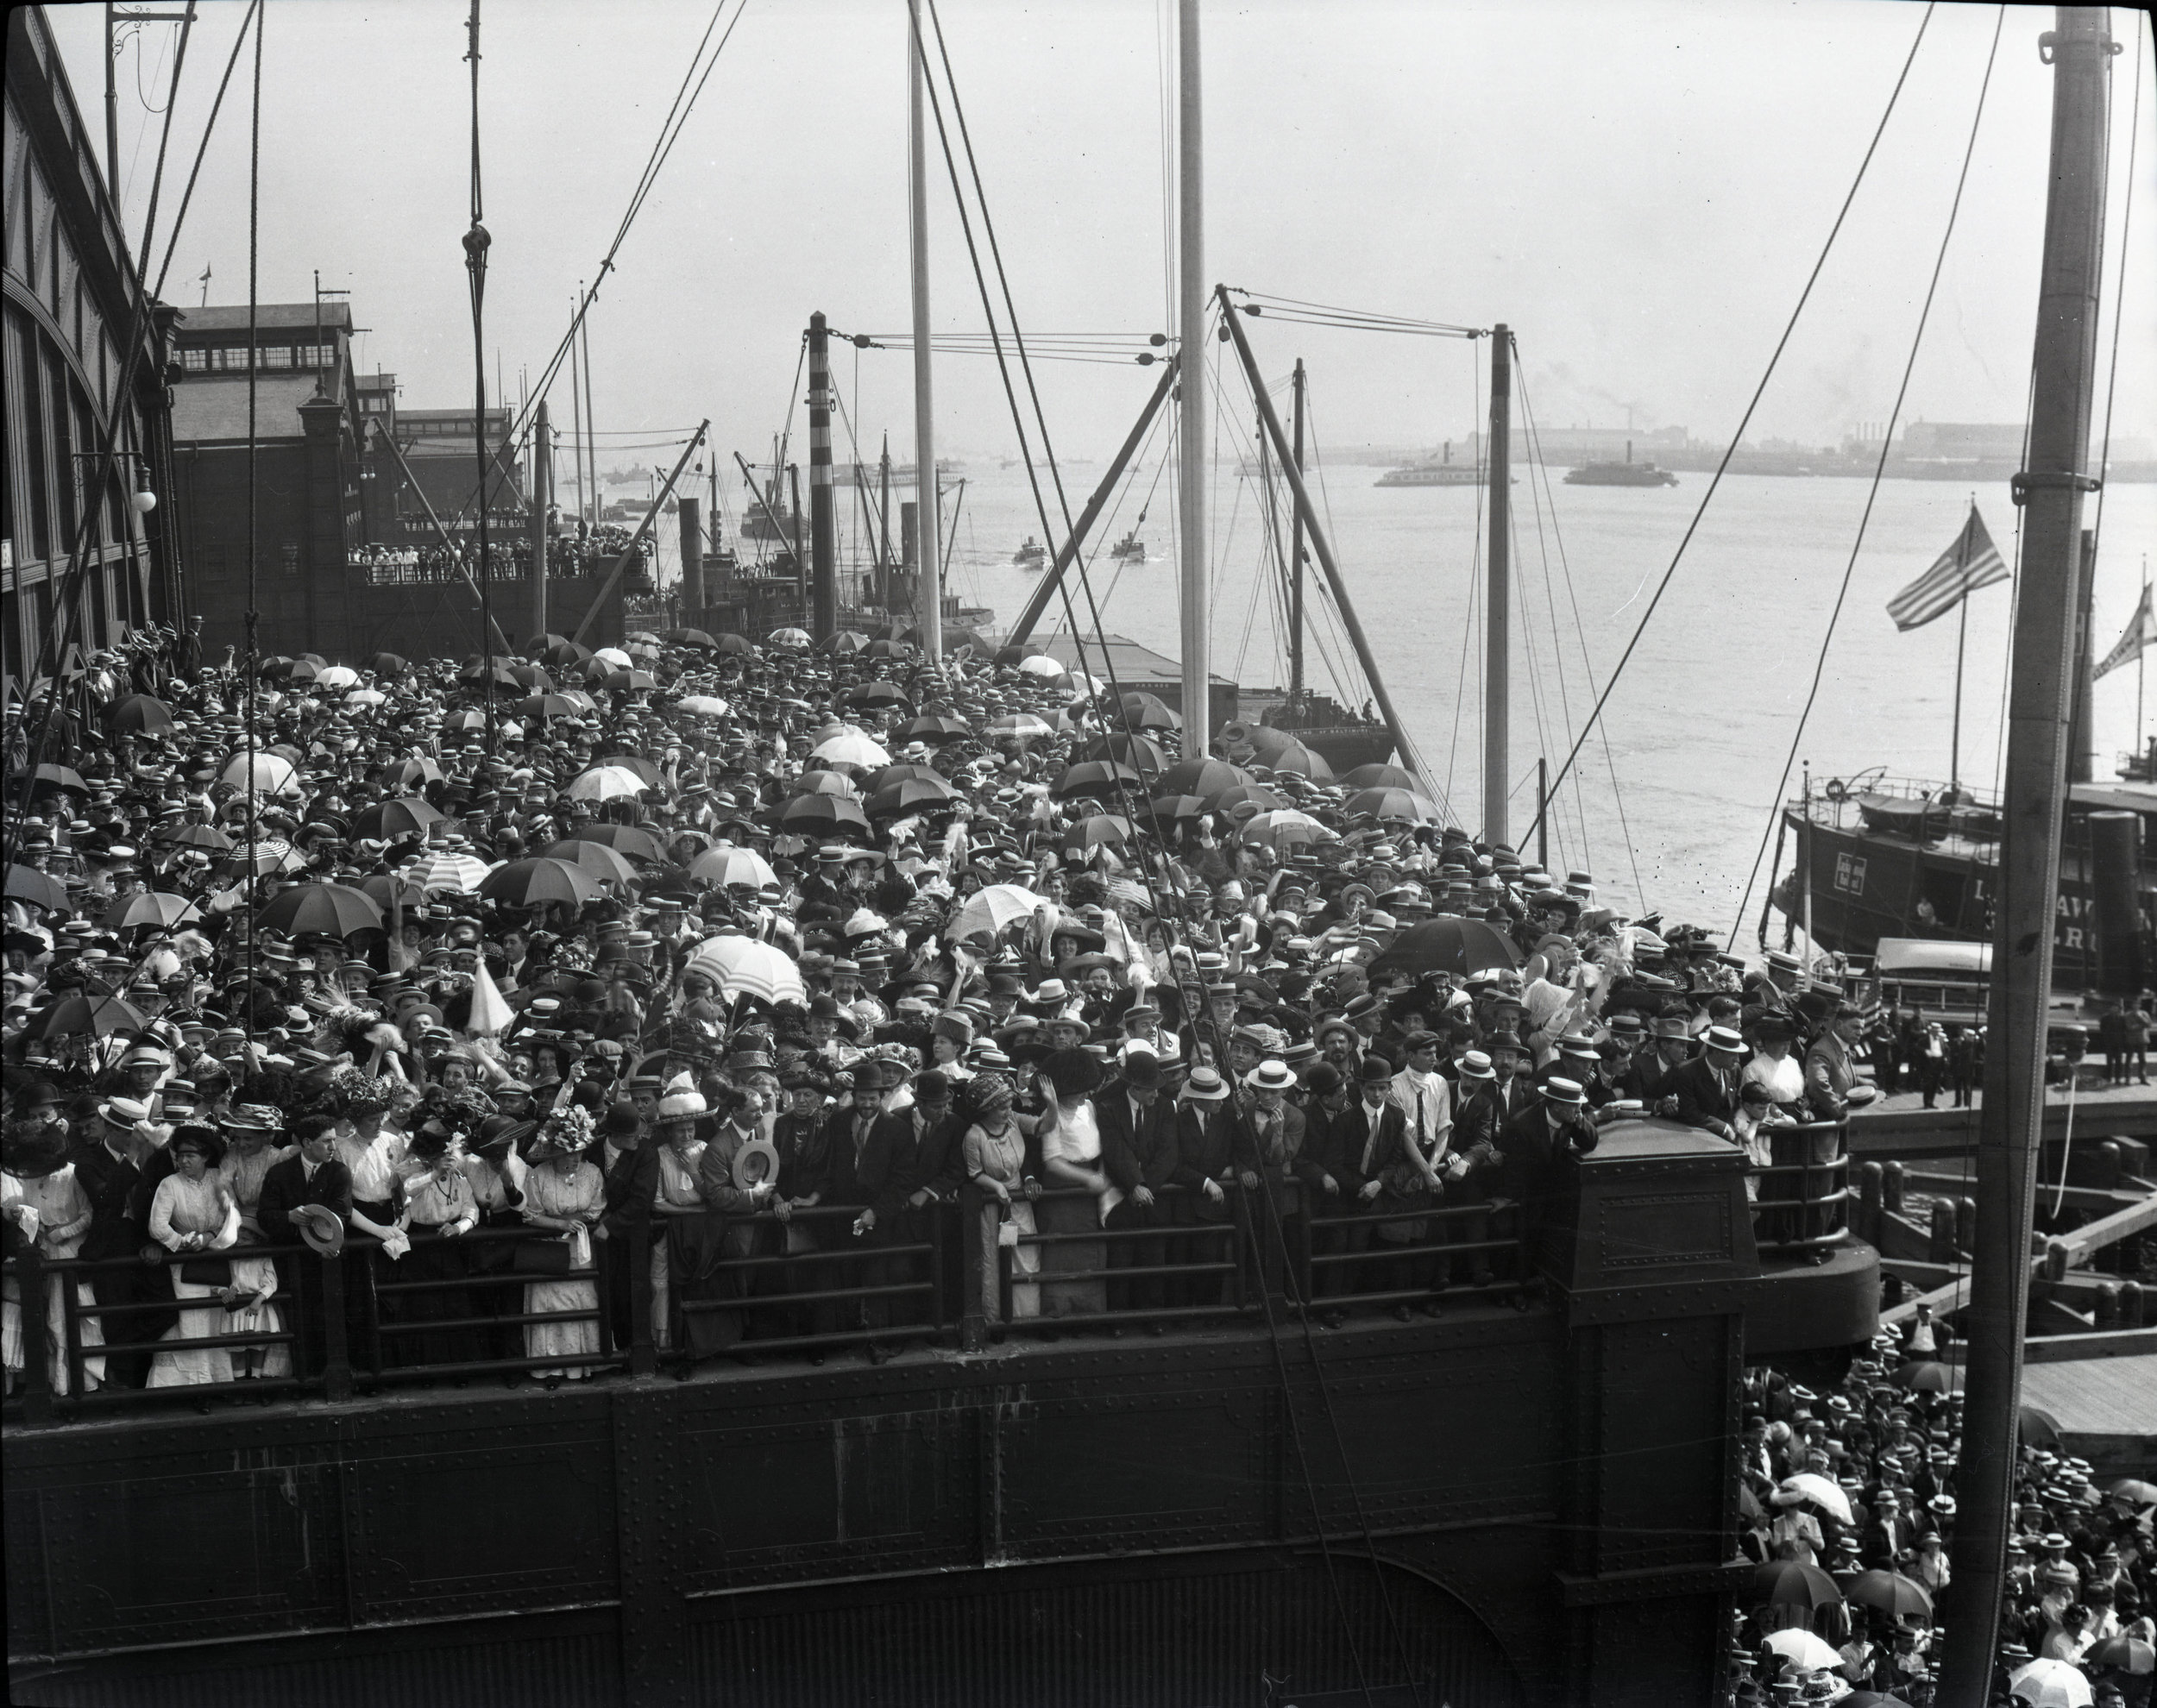  A crowd on Pier 59 in New York City where ships arrived or left 